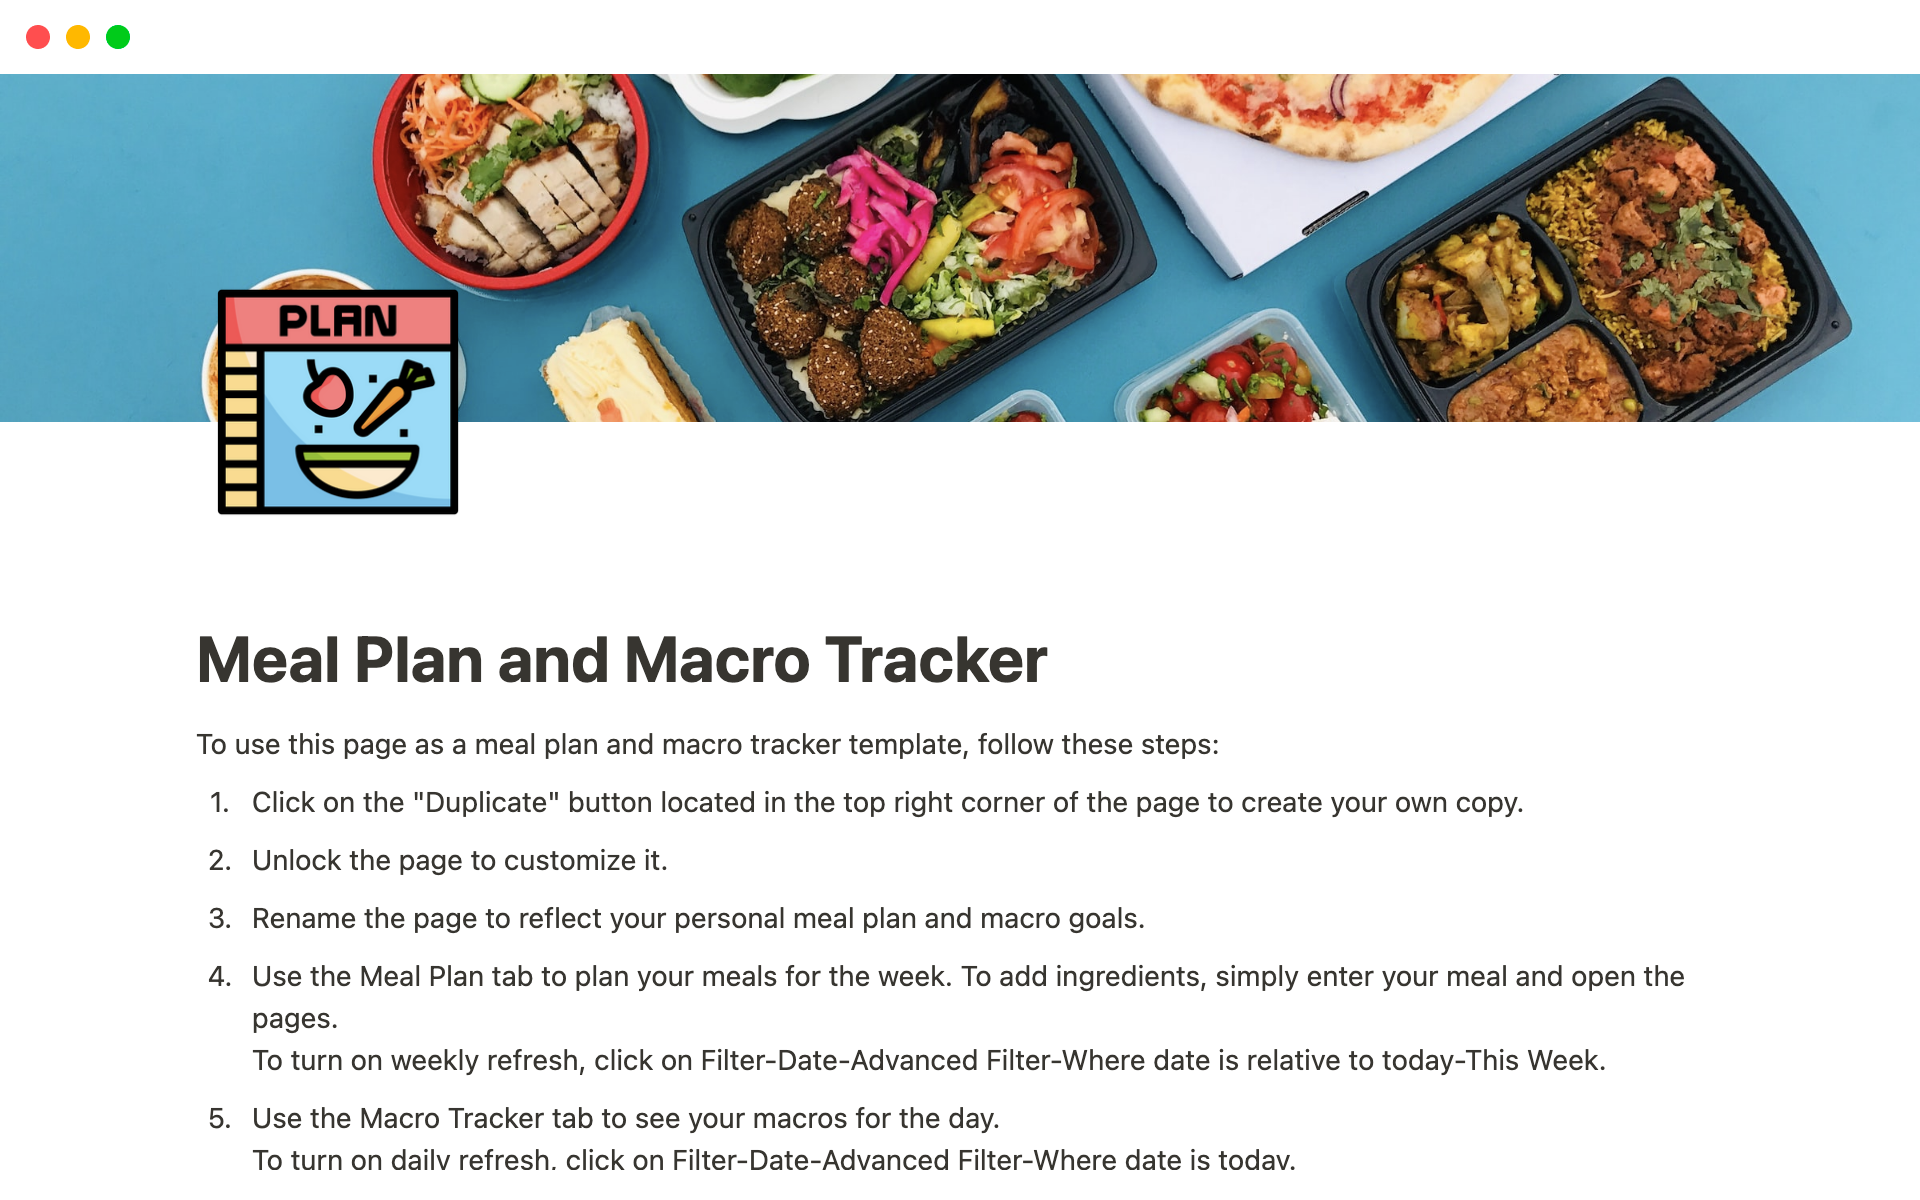 Weekly meal plan and macro tracker.